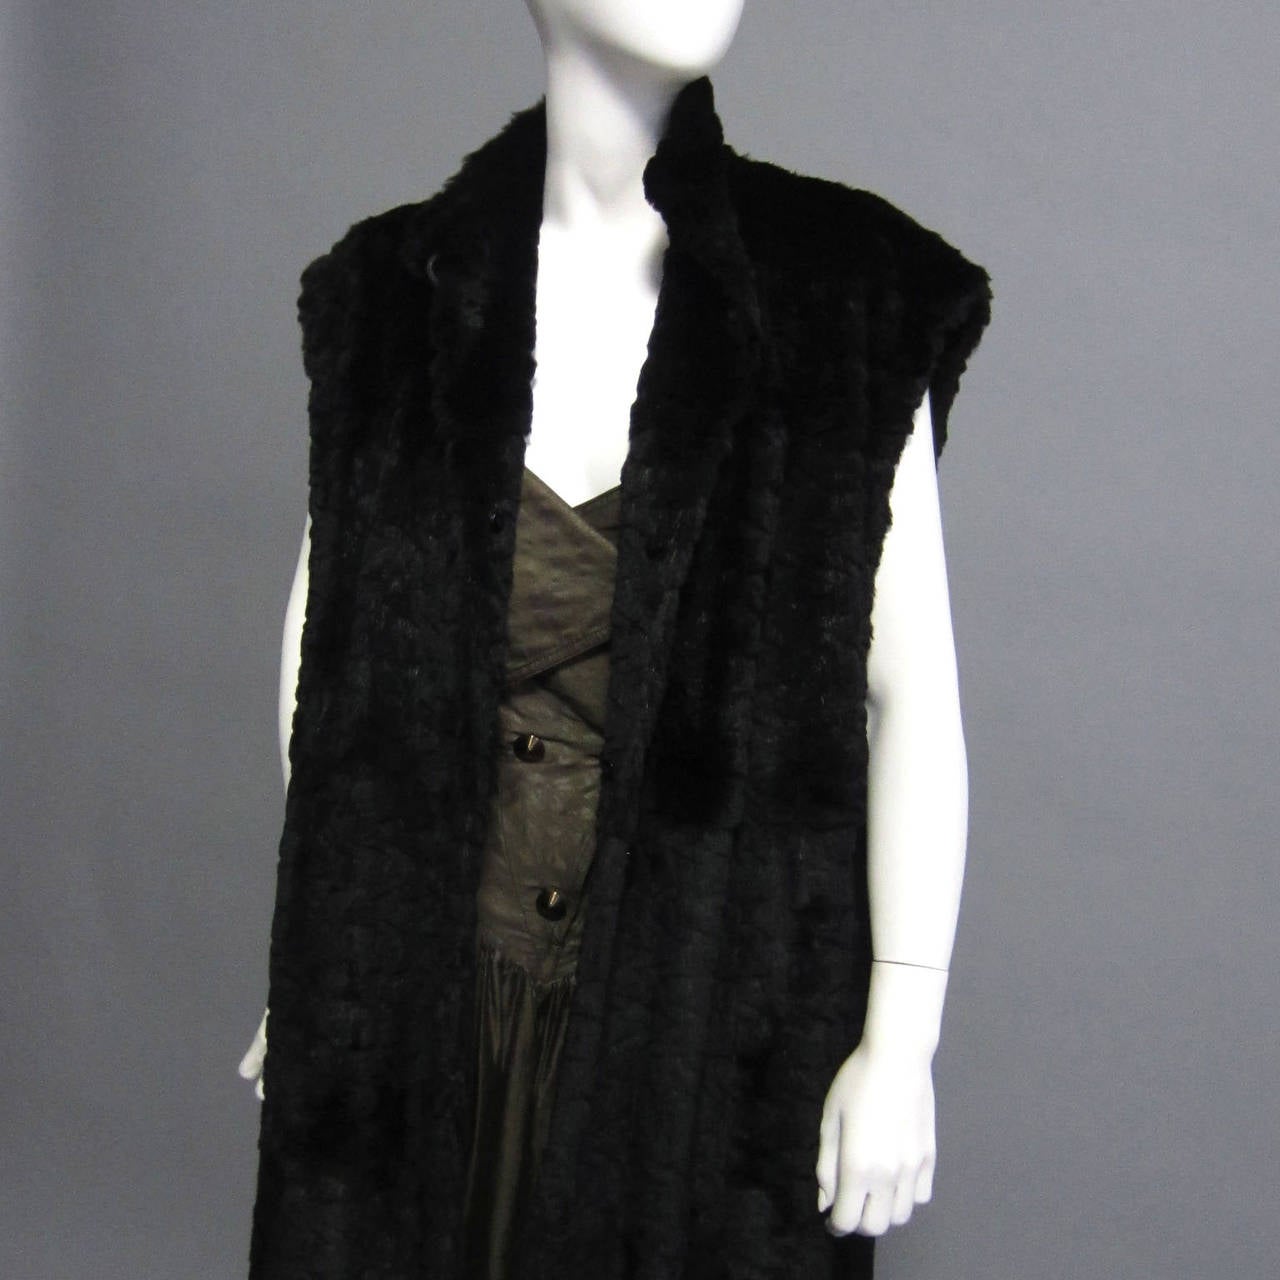 This FENDI Coat is really two pieces in one; a black swing coat, and a fur maxi vest. The two pieces can be worn together, or separately. The coat is made of black wool. The dolman sleeves are accented by the pleating detail at the shoulders. The